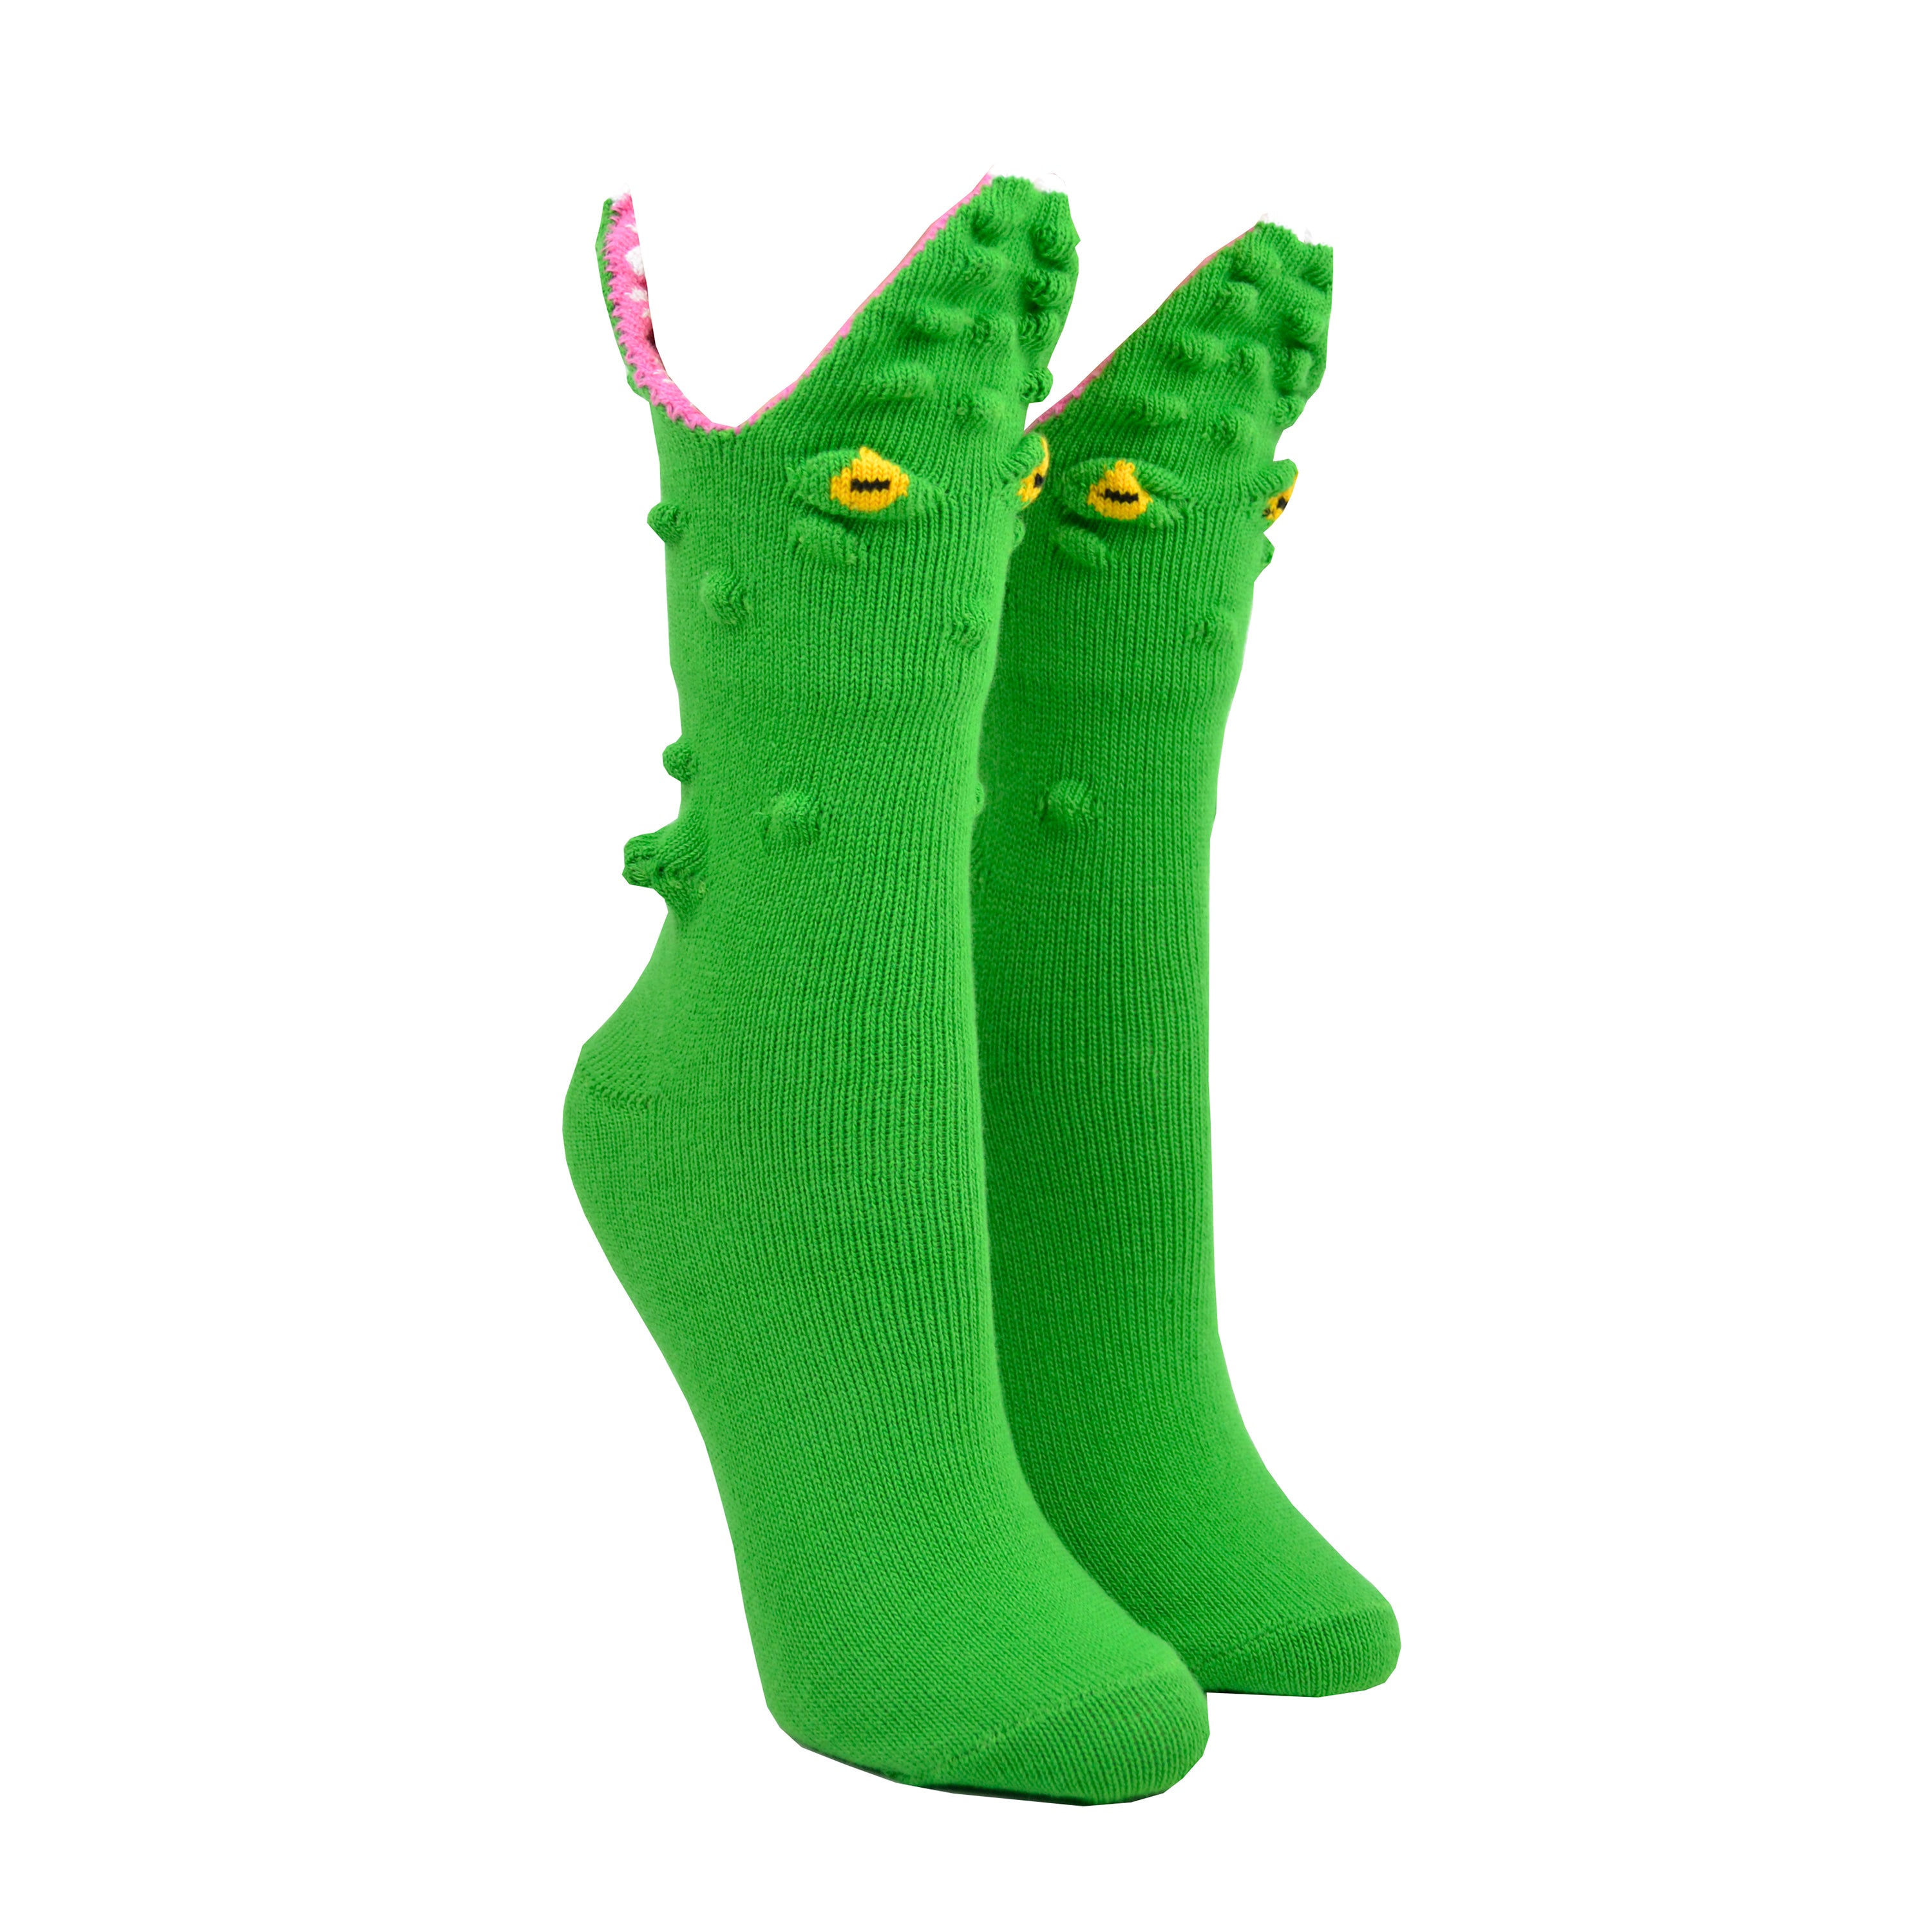 Shown on a foot mold, a pair of Foot Traffic, green cotton women's crew socks with three dimensional pattern of scaly alligator eating the foot